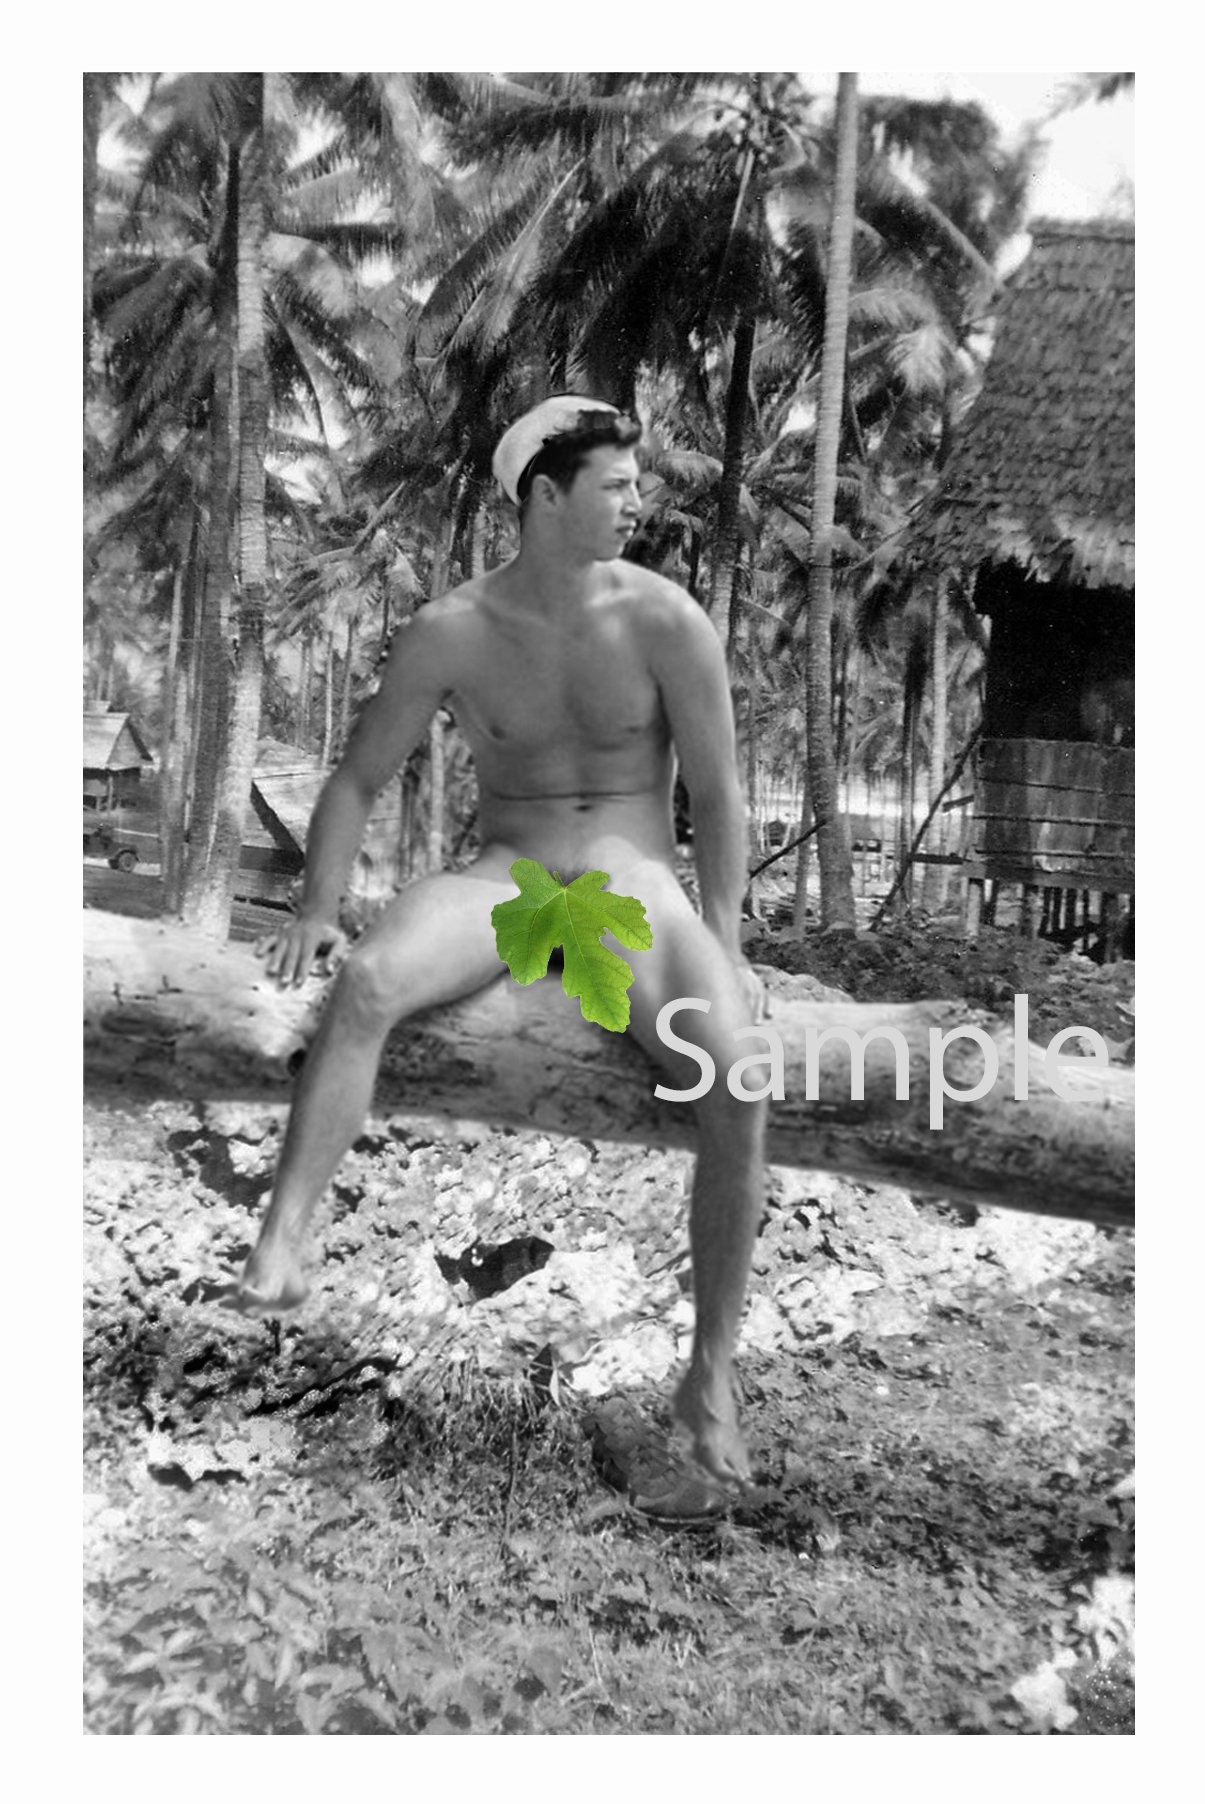 Vintage 1940's Photo Nude Sailor Poses for His Buddy's - Etsy Singapore